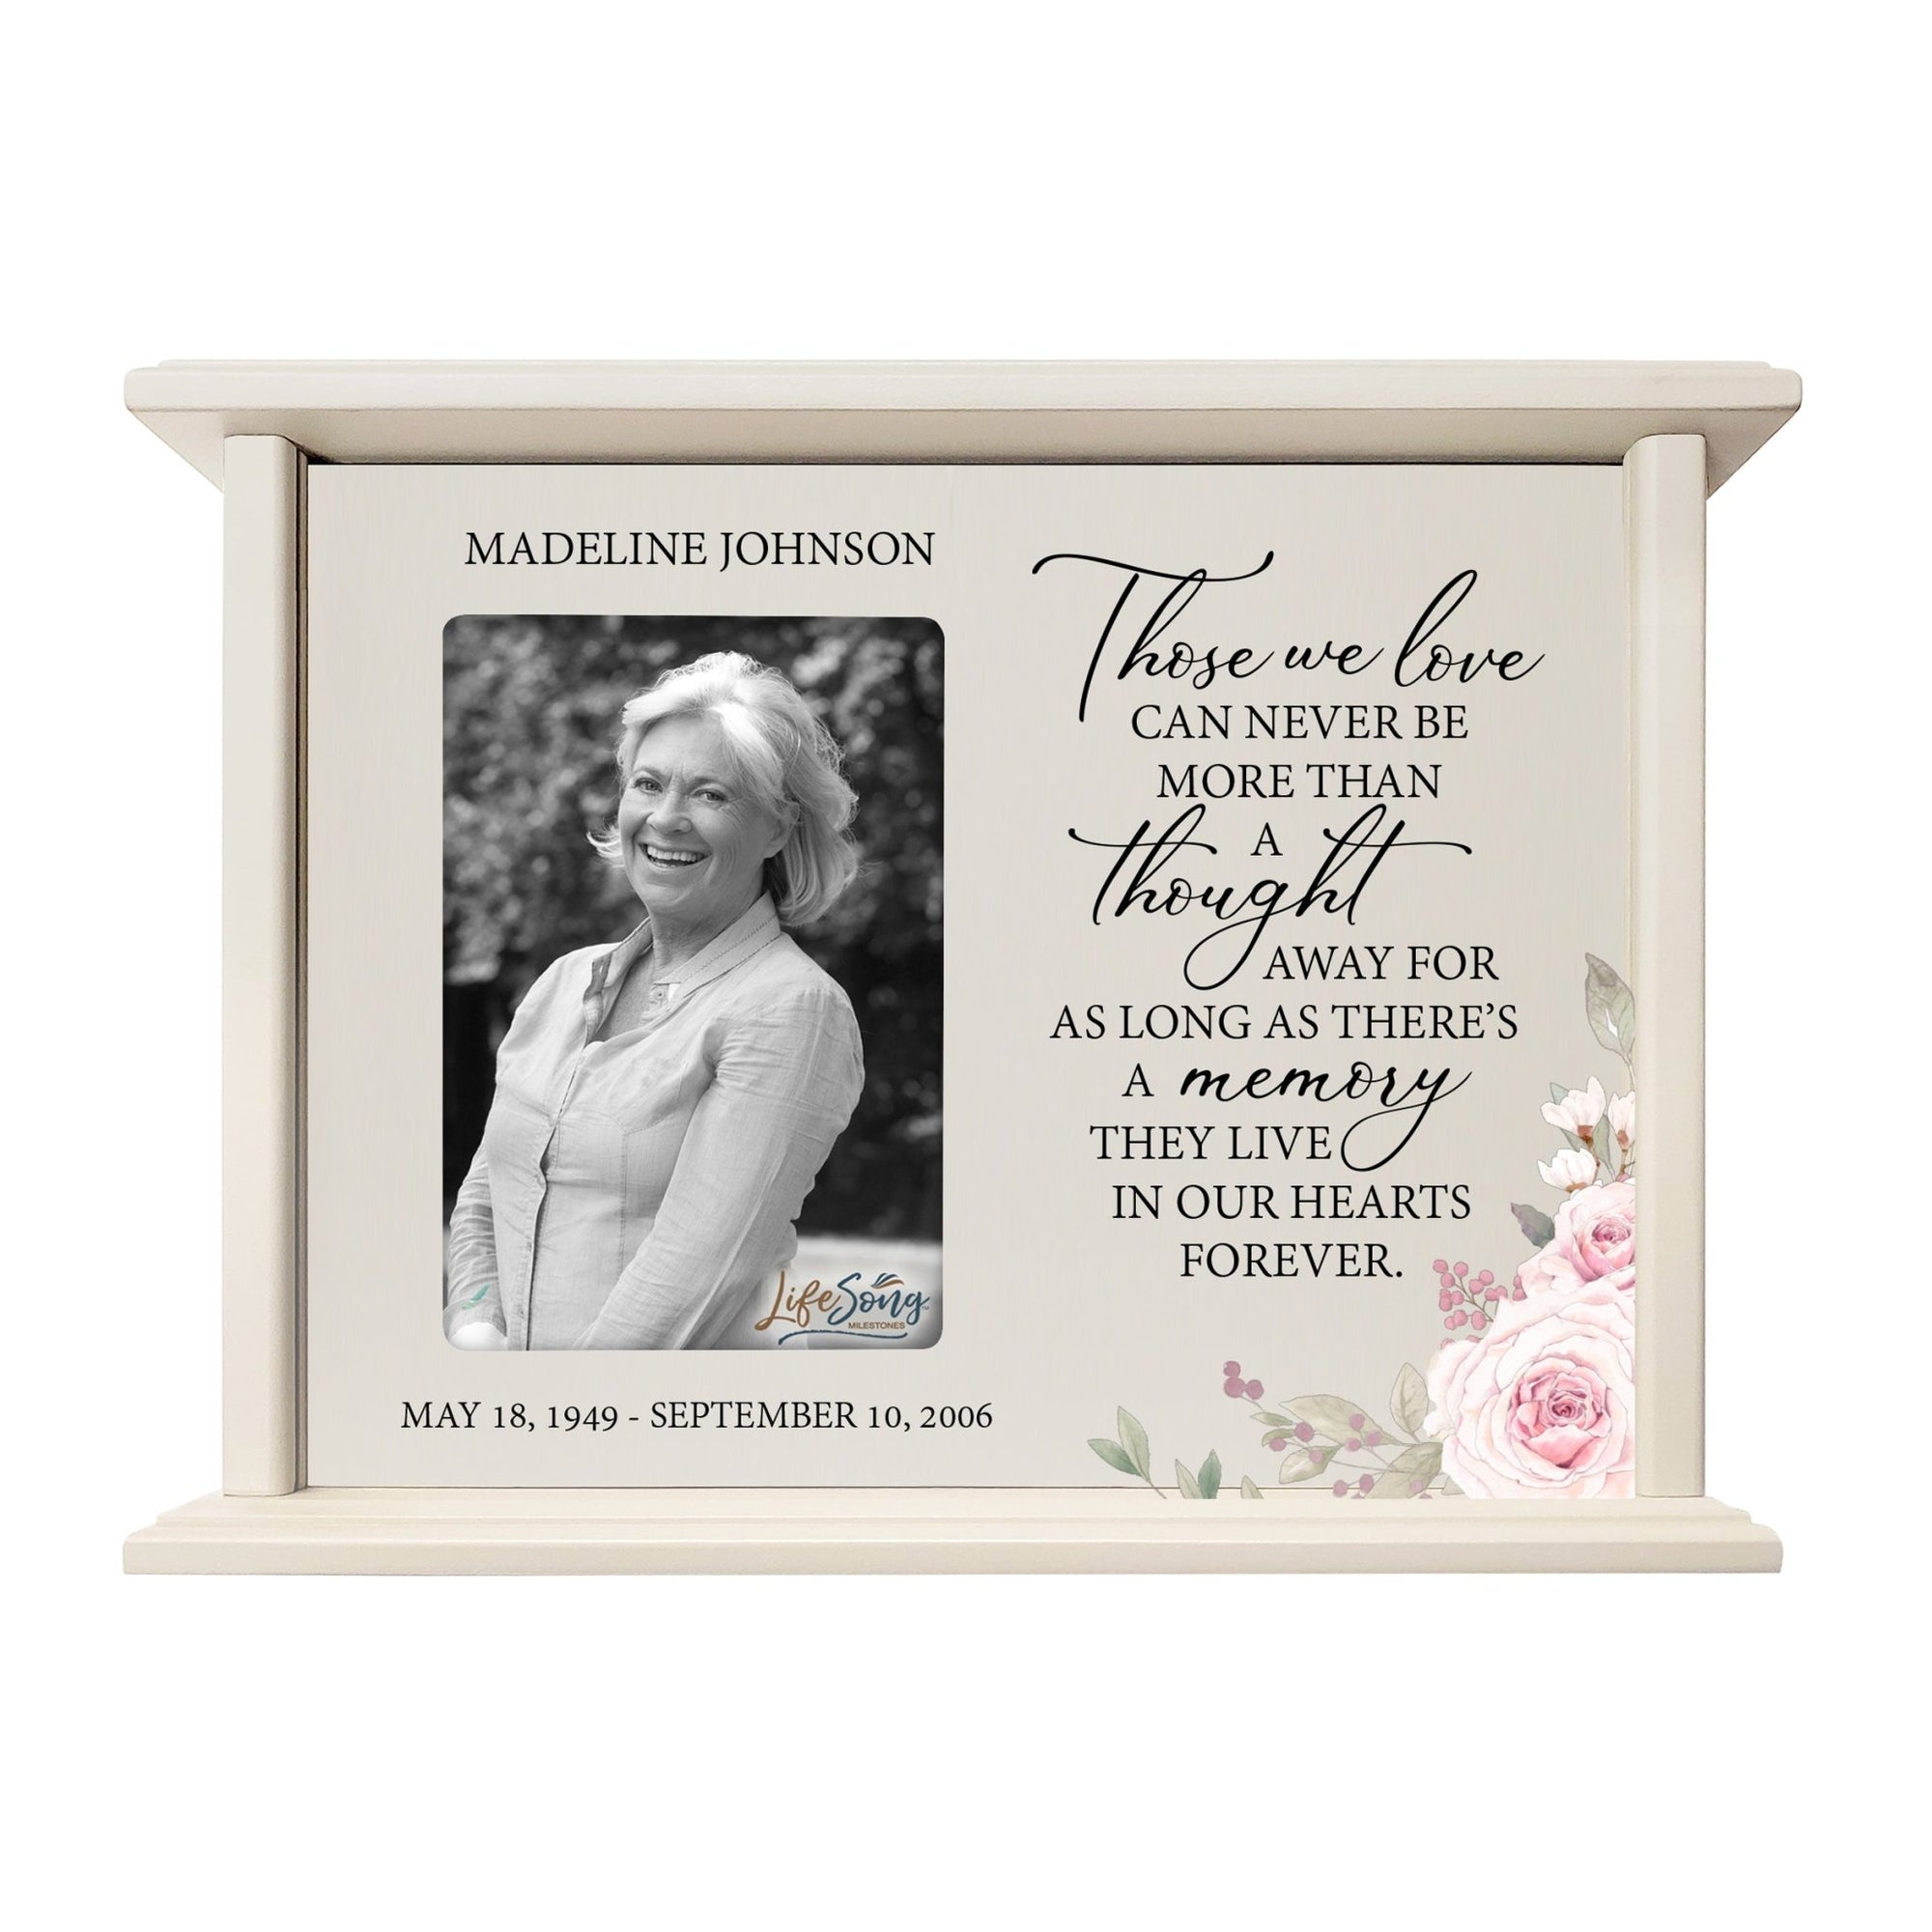 Personalized Memorial Cherry Wood 12 x 4.5 x 9 Cremation Urn Box with Picture Frame holds 200 cu in of Human Ashes and 4x6 Photo - Those We Love Can Never (Ivory) - LifeSong Milestones